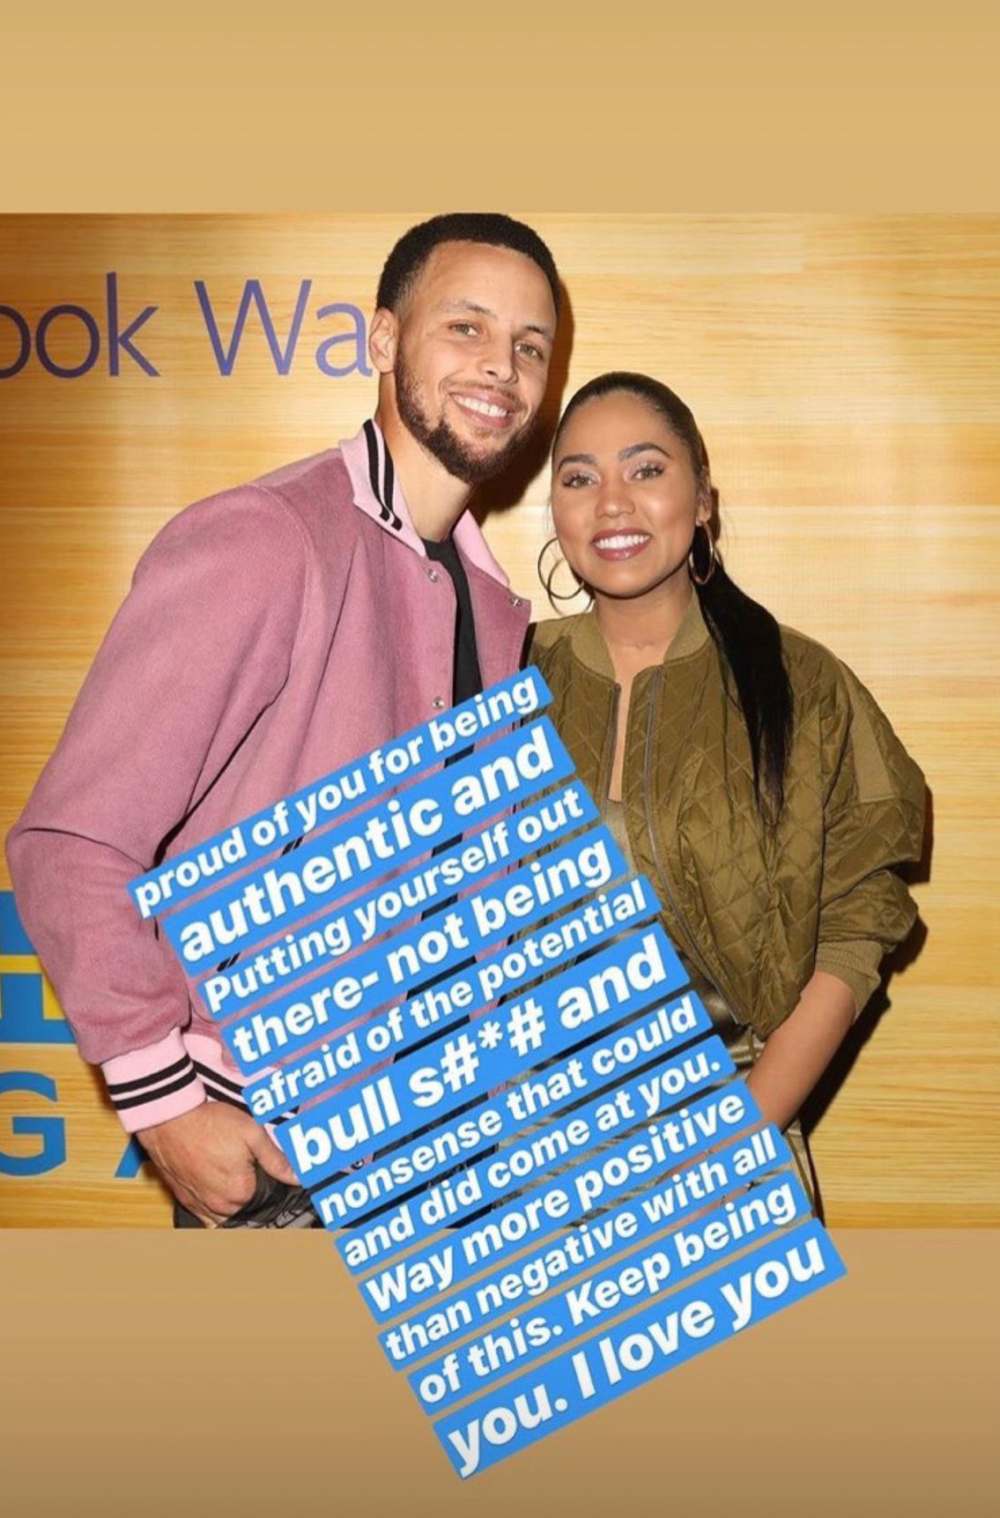 Stephen Curry Supports Wife Ayesha Curry Backlash